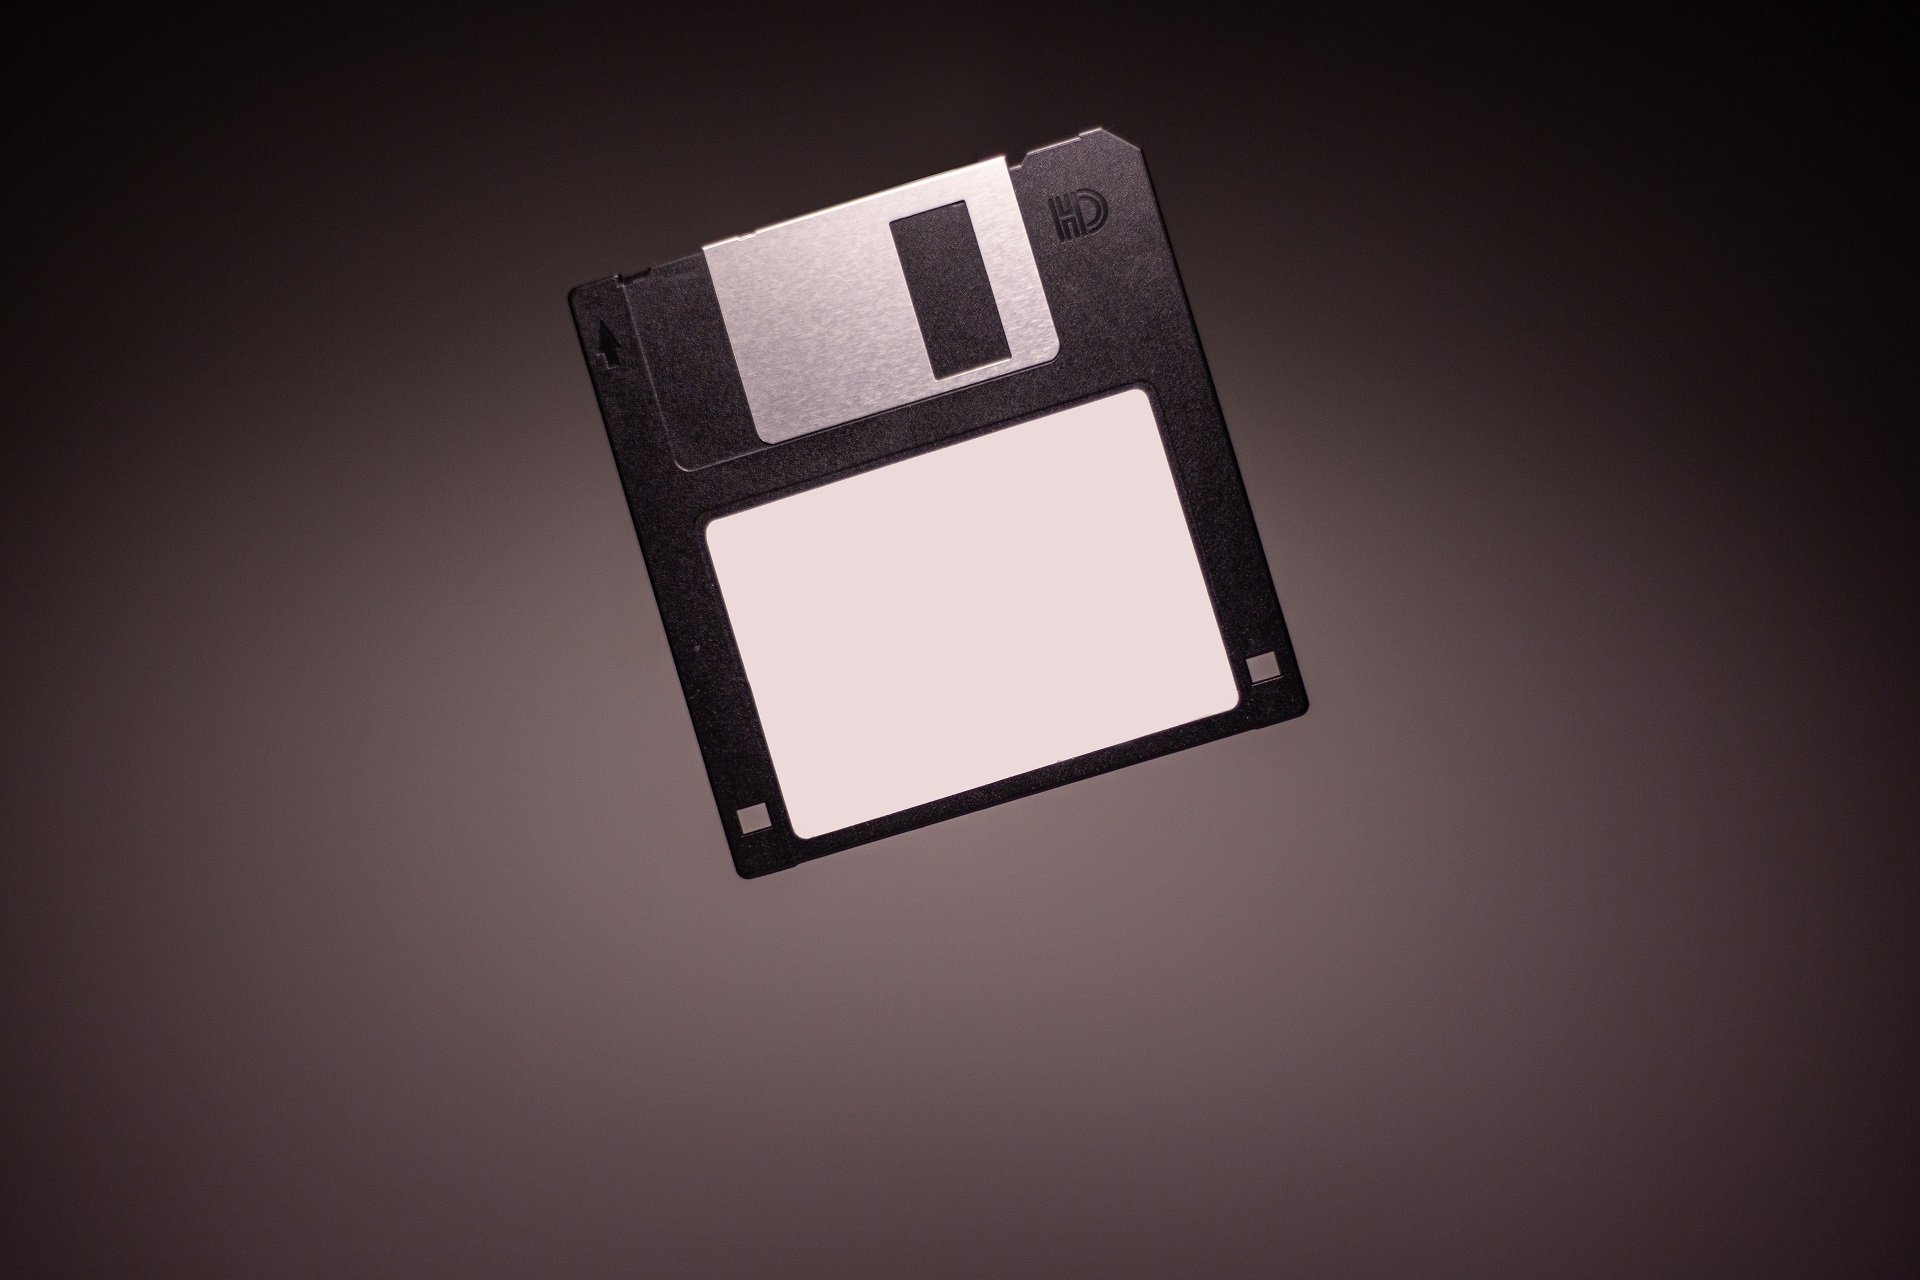 disk or diskette cannot be accessed